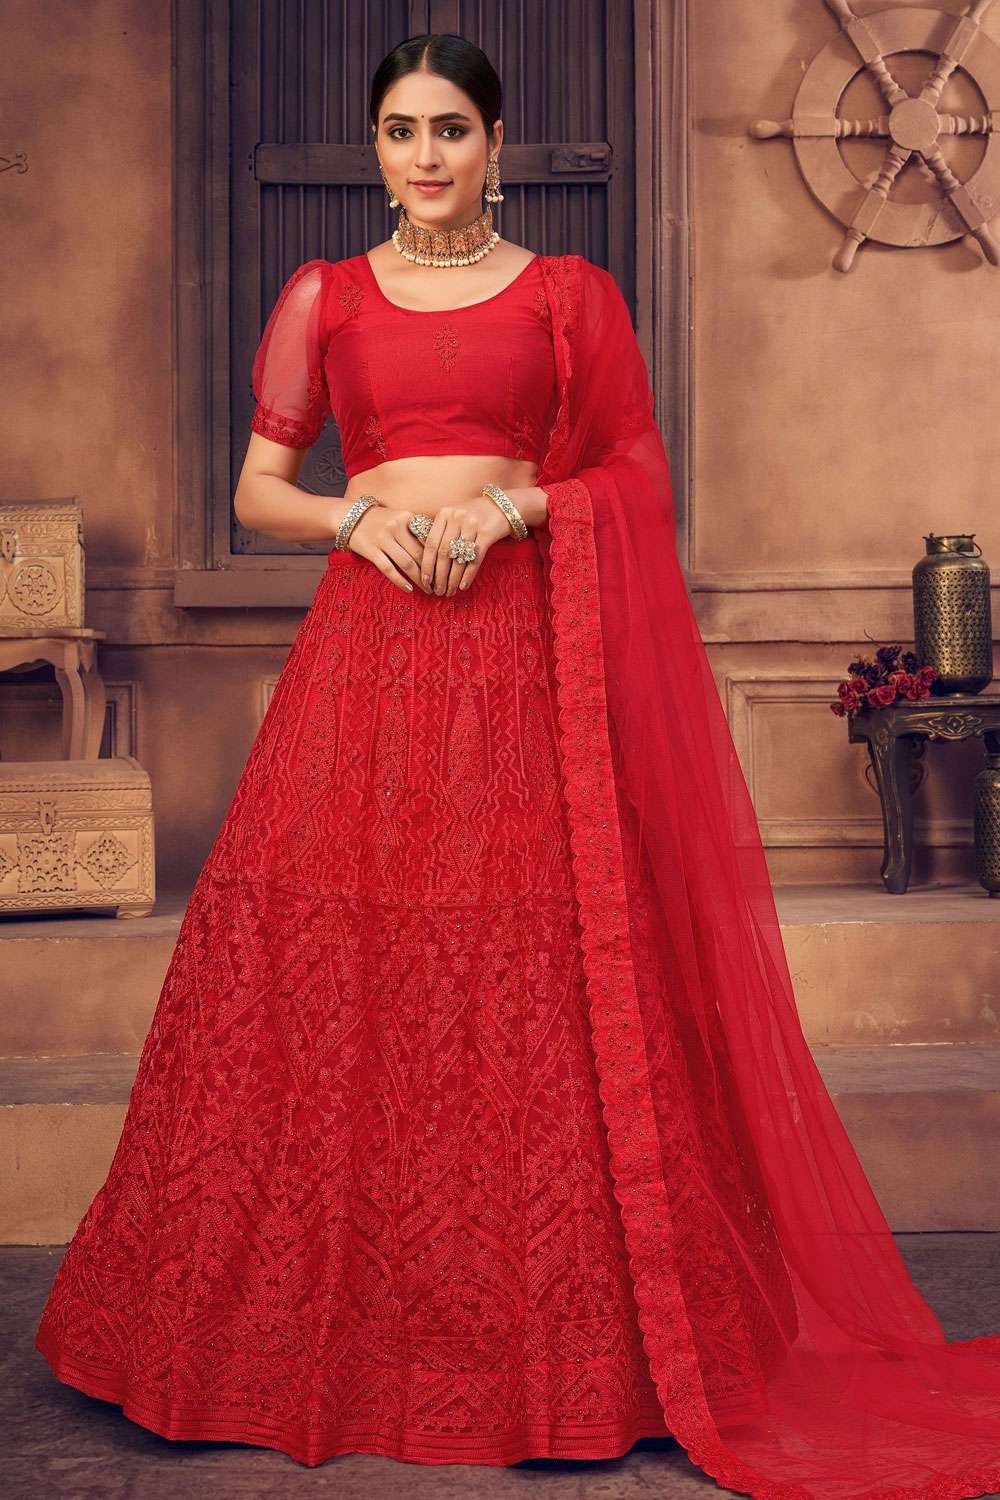 Search results for: 'color sare girls lehenga choli'